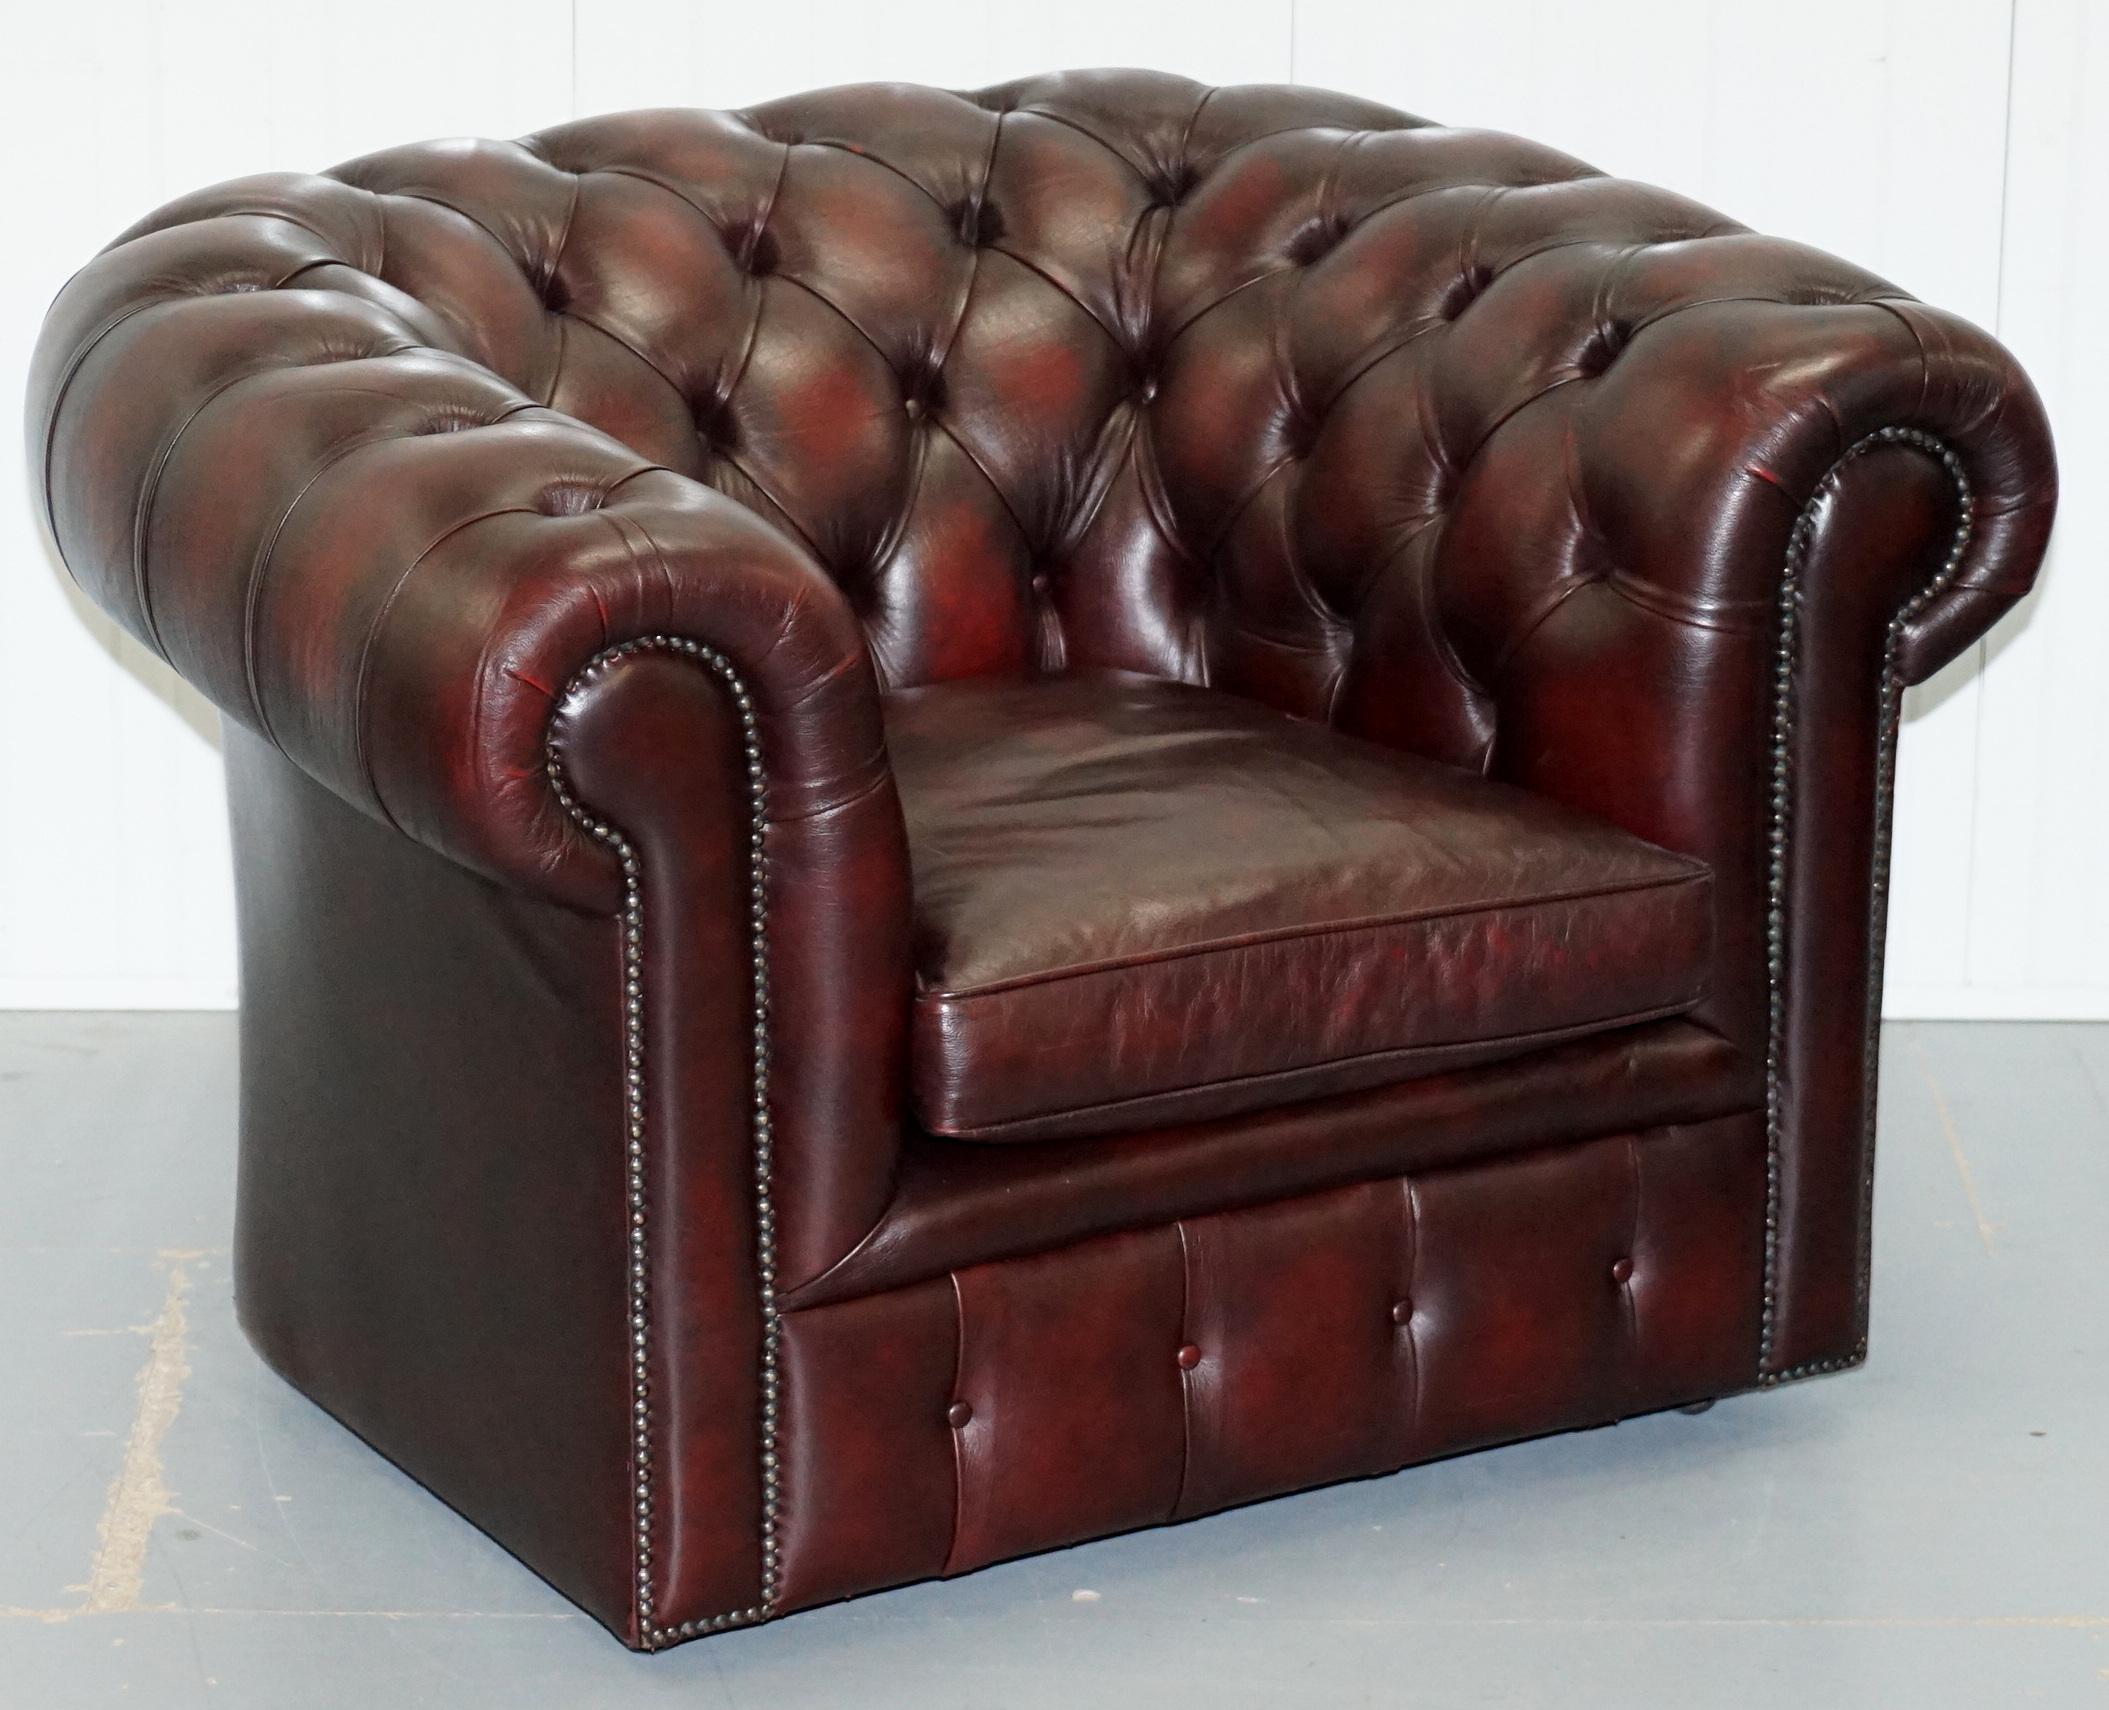 We are delighted to offer for sale this lovely pair of handmade in England Chesterfield oxblood Scottish leather club armchairs with feather filled cushions

A good looking and well made pair from the Traditional Chesterfield company, they use